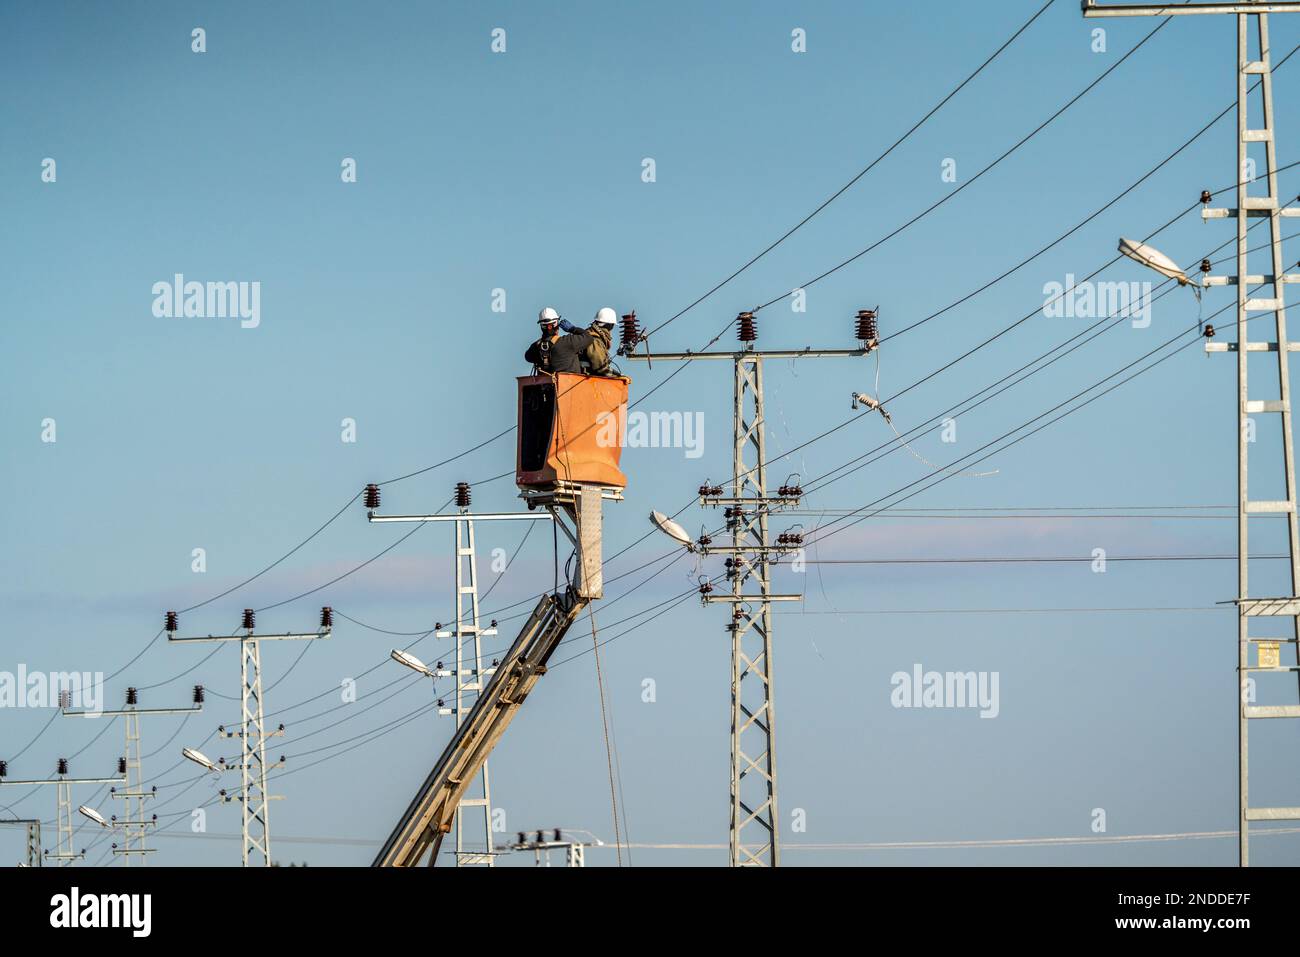 Electrical workers are making a high voltage connection. Electricity poles and cables. Stock Photo